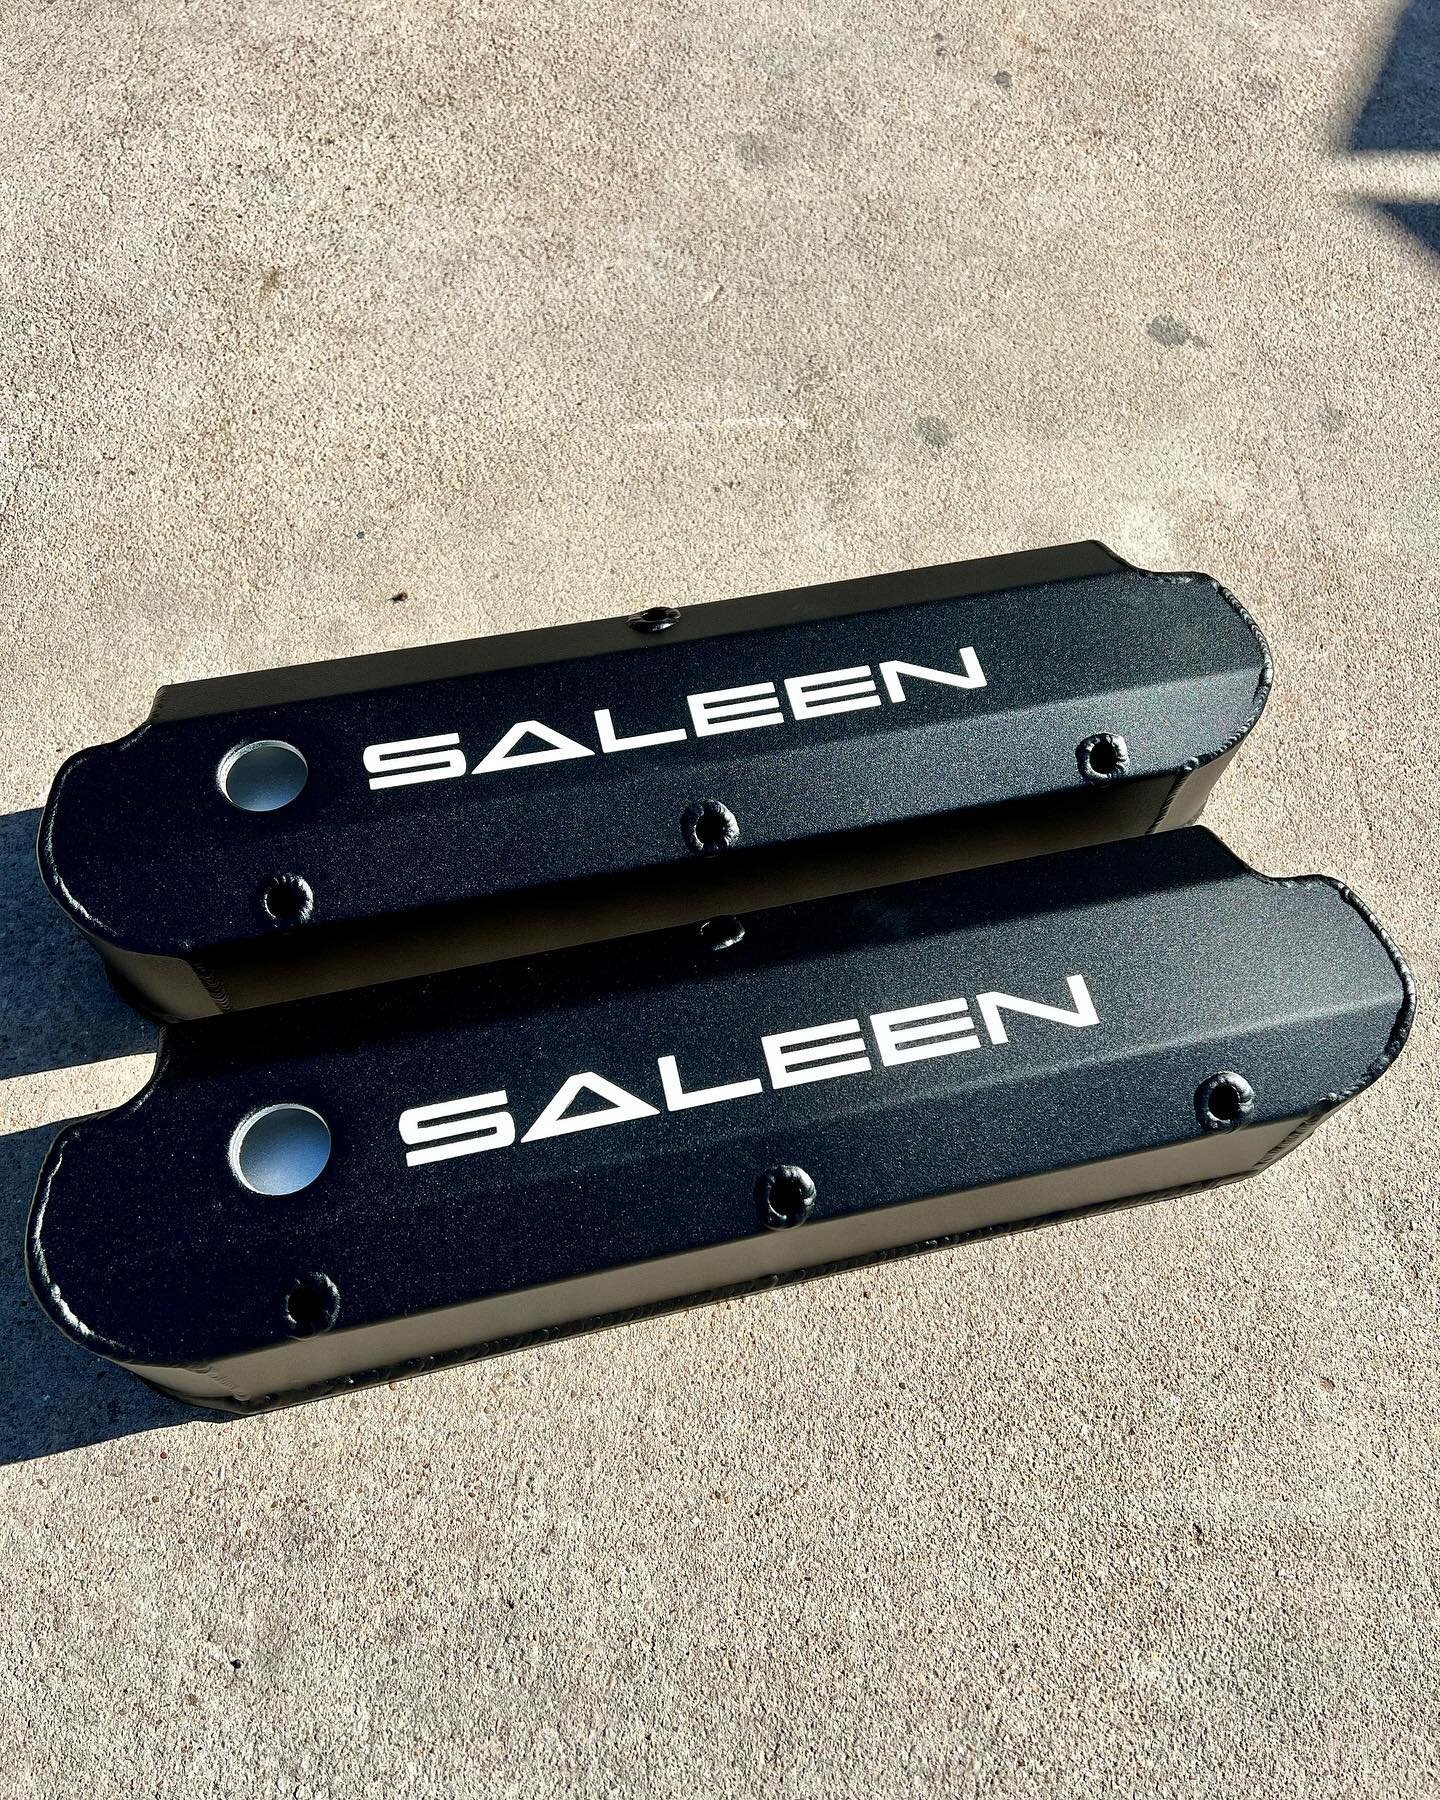 Long time, no post. 😂 Let&rsquo;s see if we can get back into it with this pair of custom all powder Saleen valve covers for @cotterfactory  #enigmacoatings #powdercoating #powdercoat #saleen #mustang #foxbody